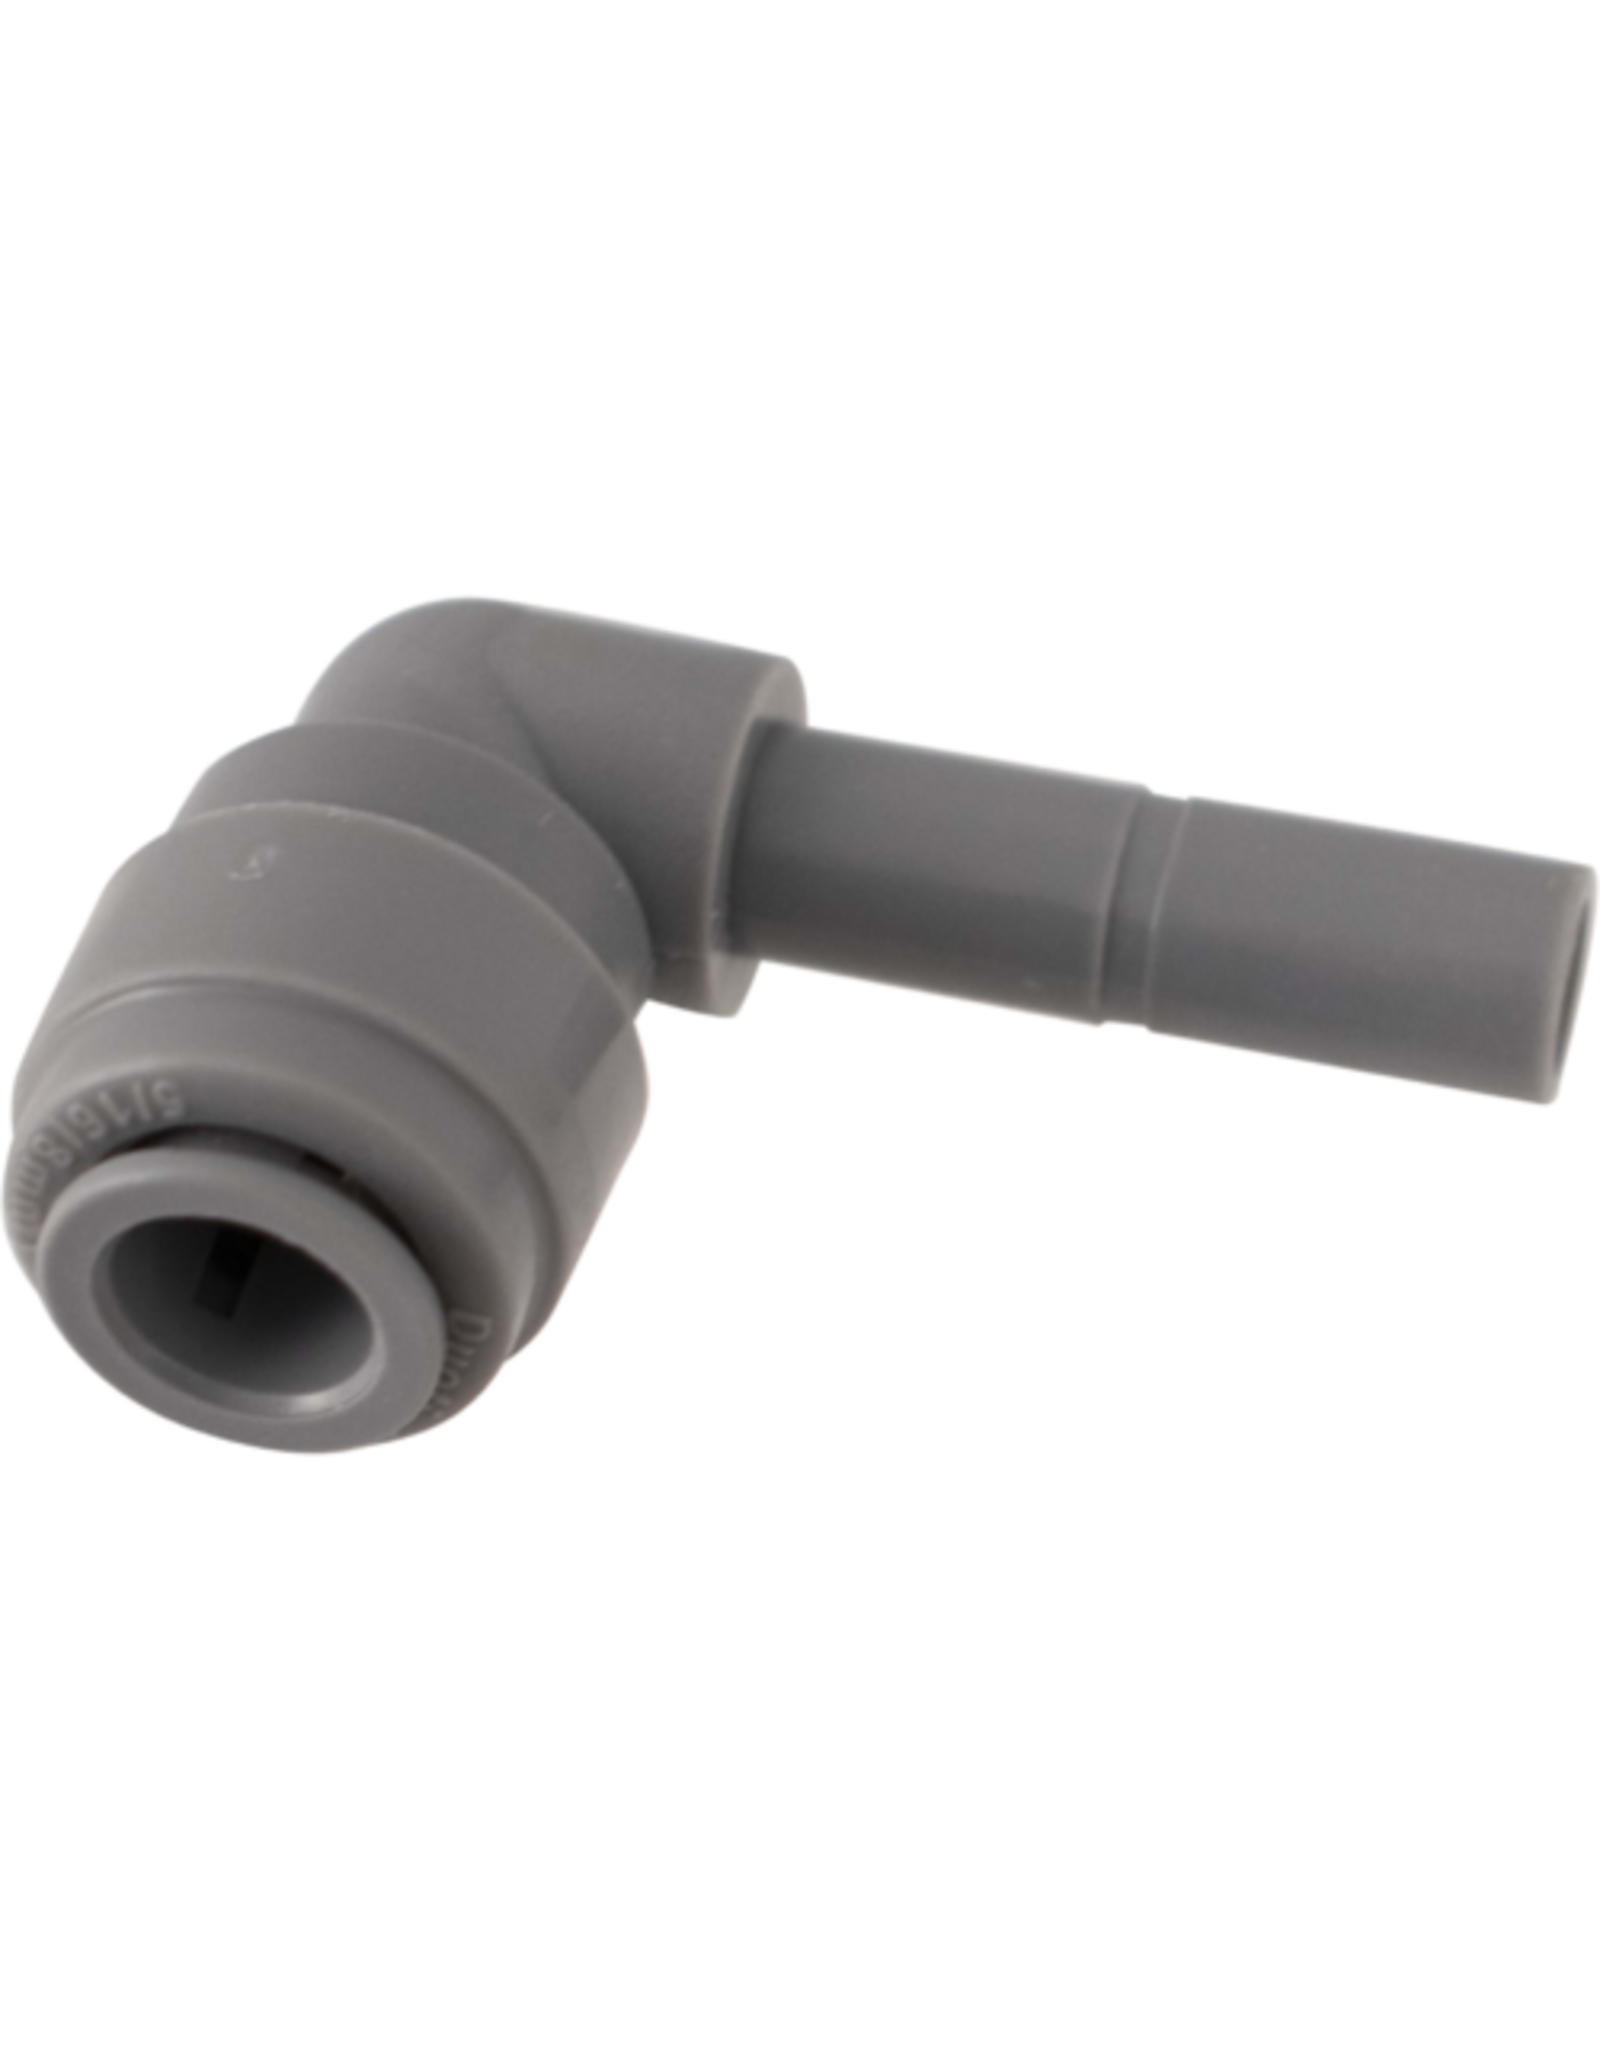 KegLand Duotight Push-In Fitting - 8mm (5/16 in.) x 8mm (5/16 in.) Male Elbow